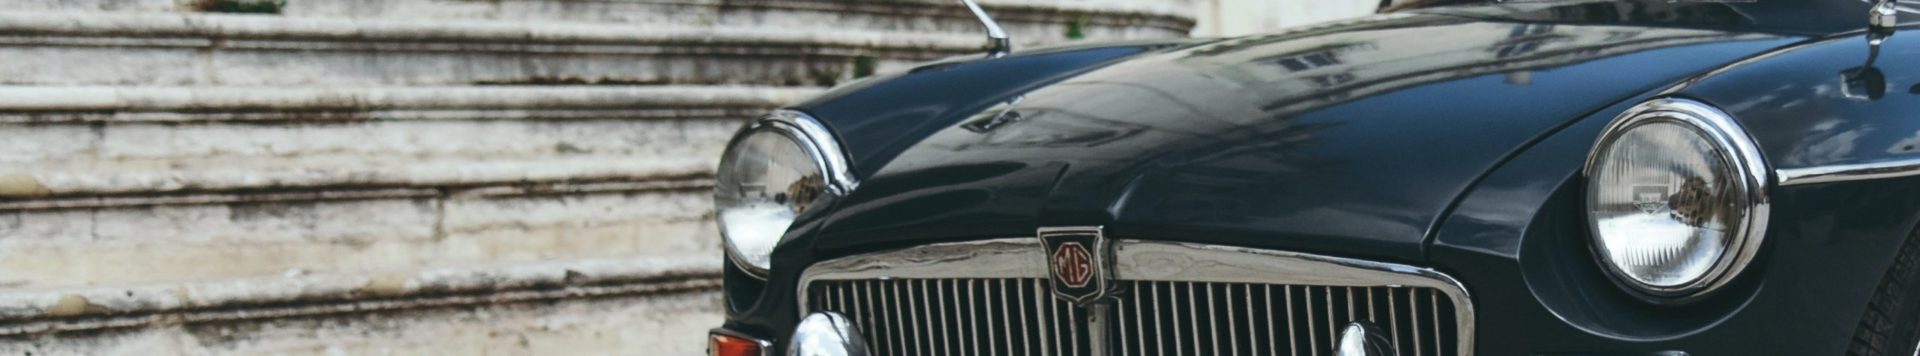 Classic Car Insurance for NHS Staff